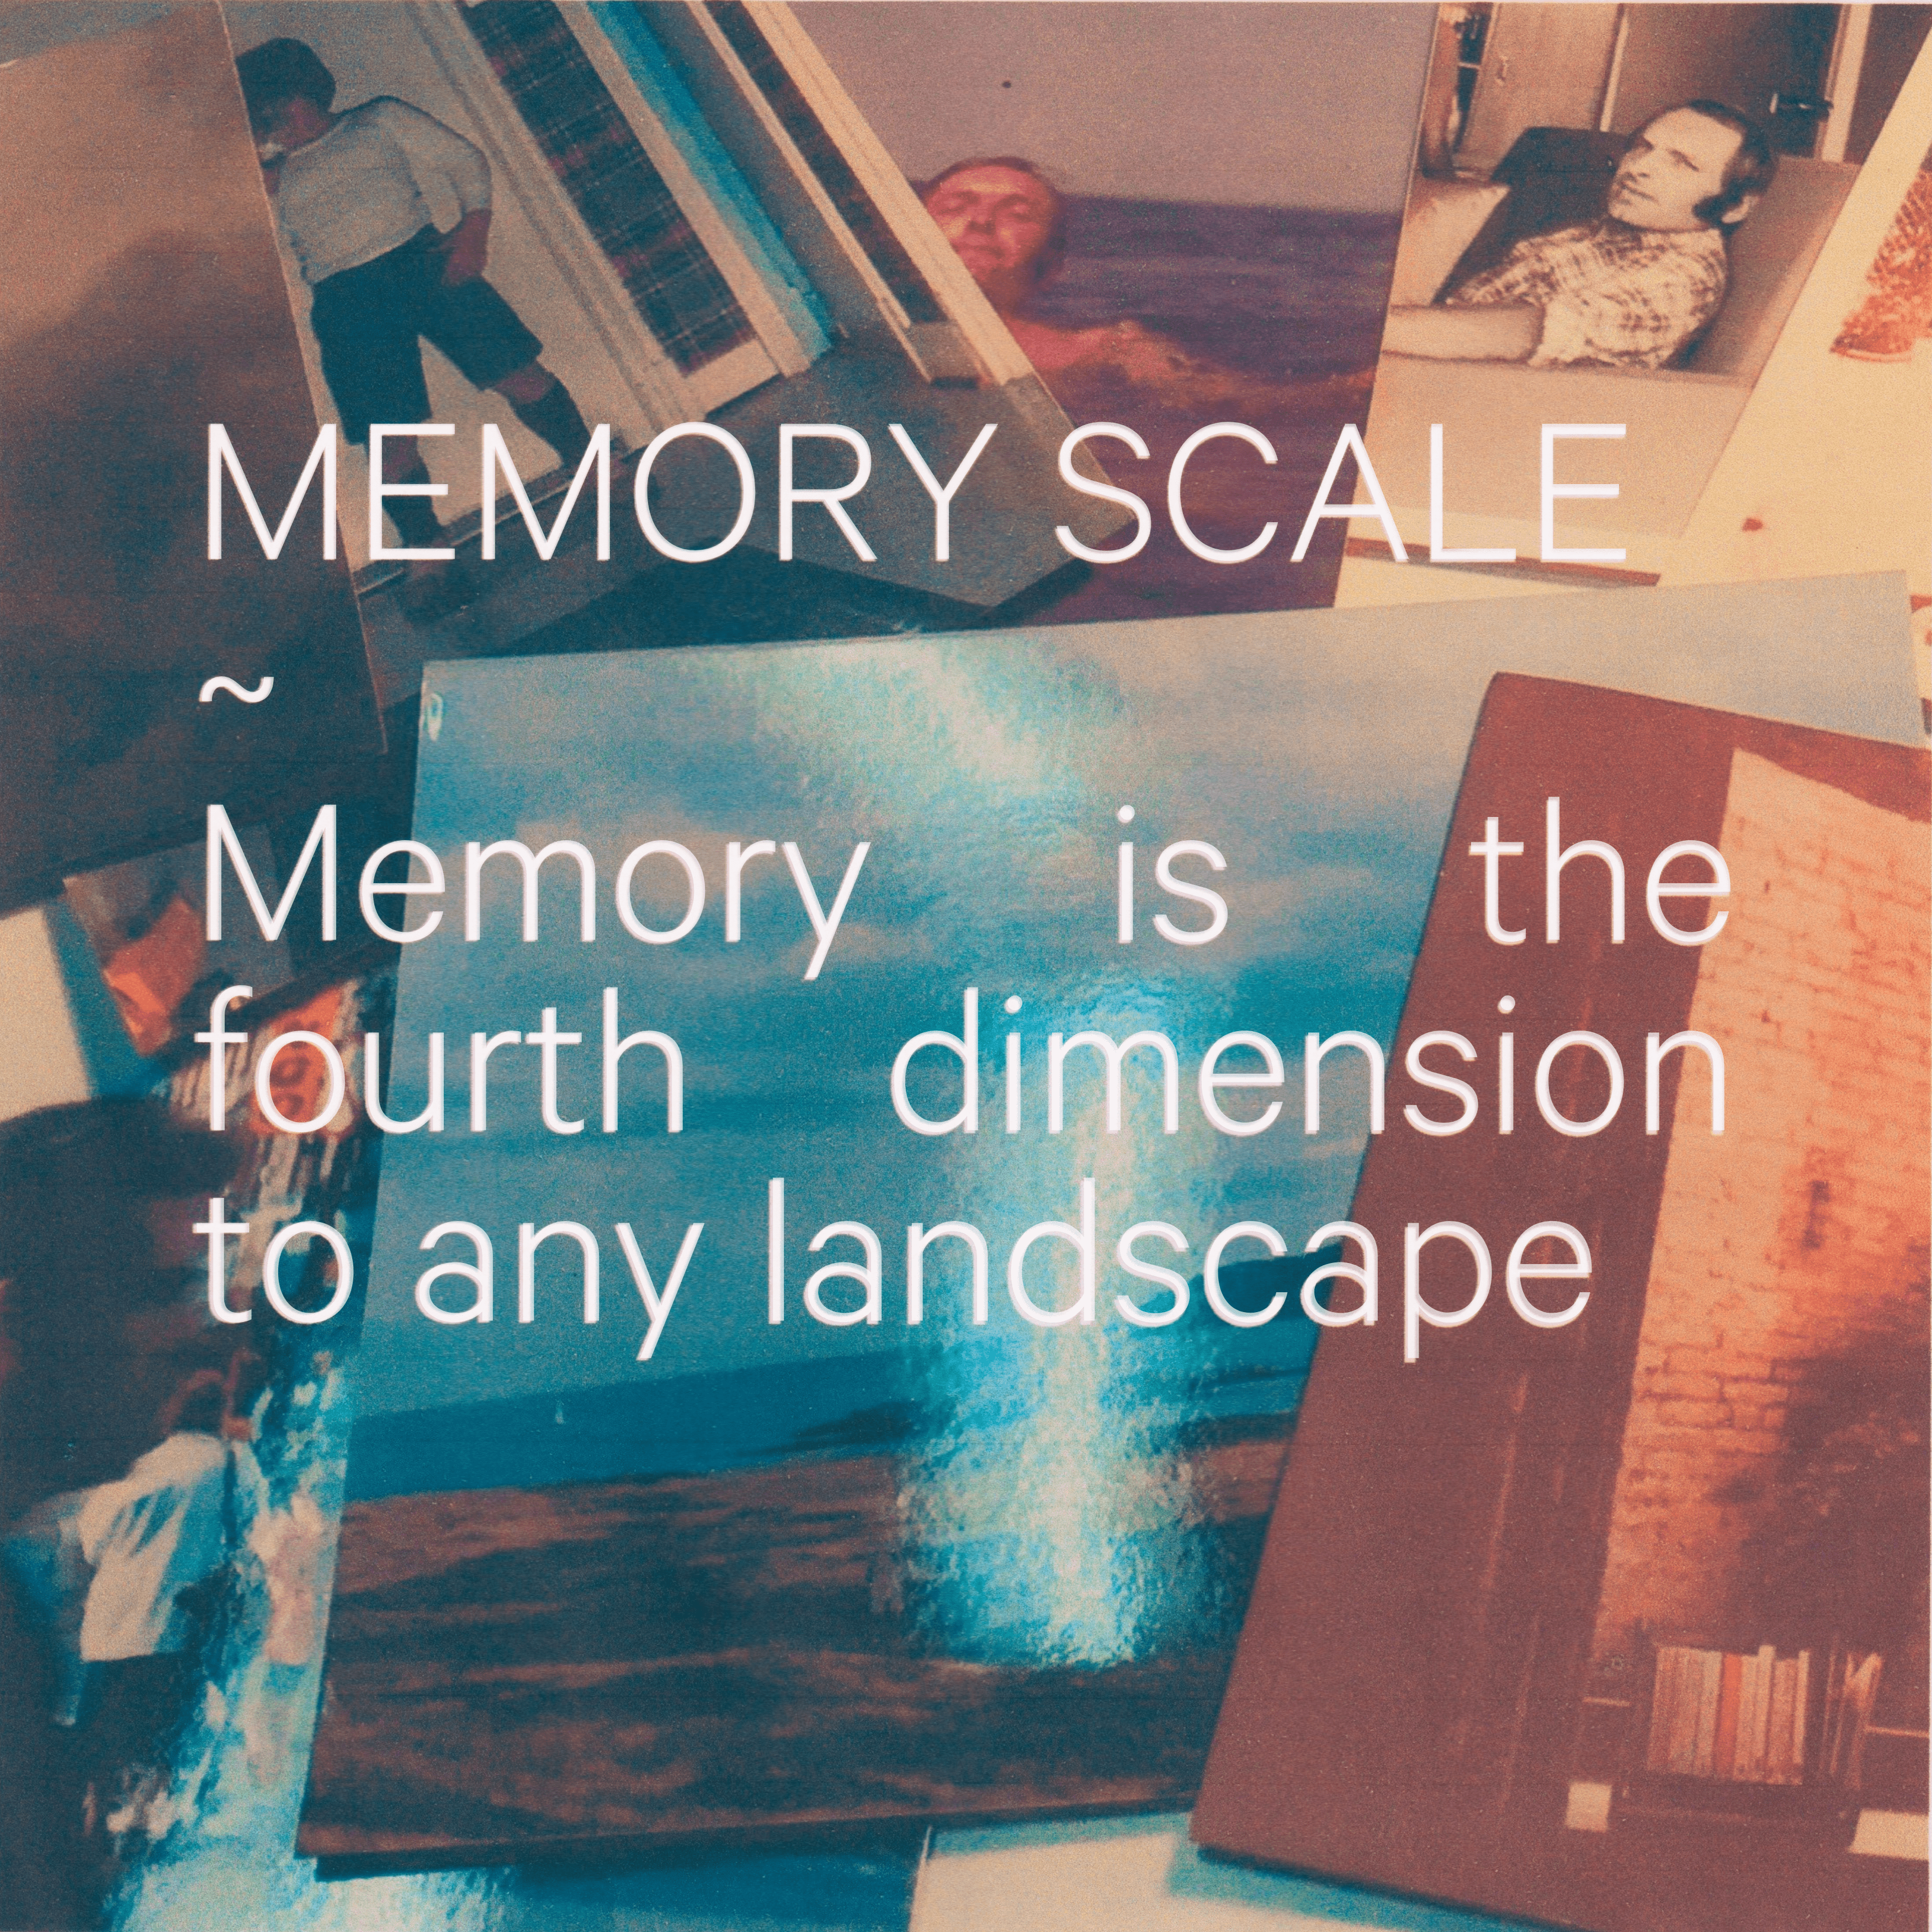 Cover art for Memory Scale's song: Memory is the fourth dimension to any landscape